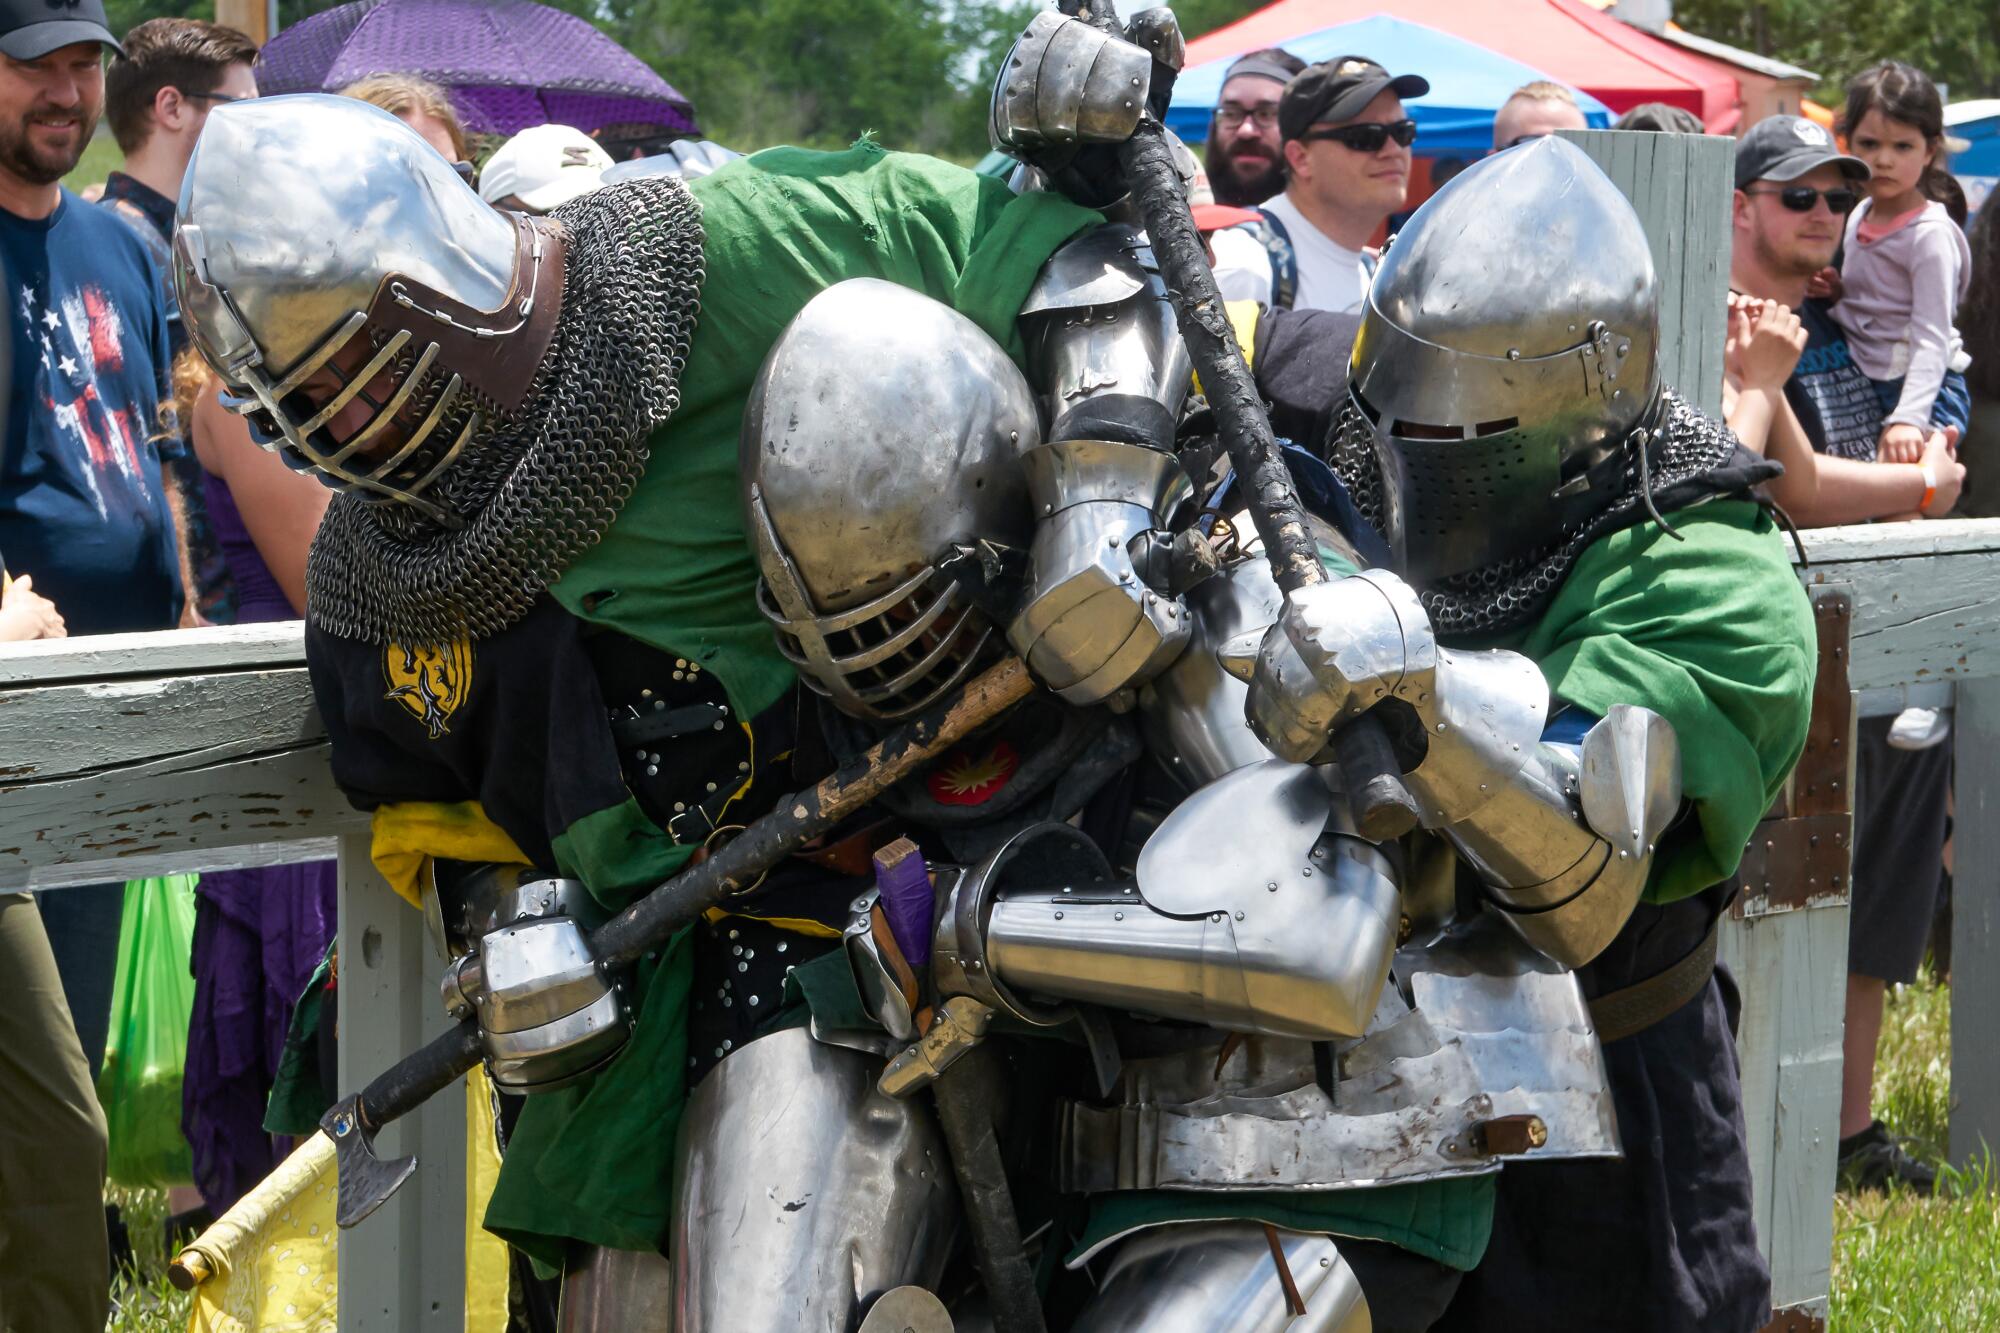 People in armor grapple, holding medieval-style weapons, as spectators watch on the other side of a wooden fence.